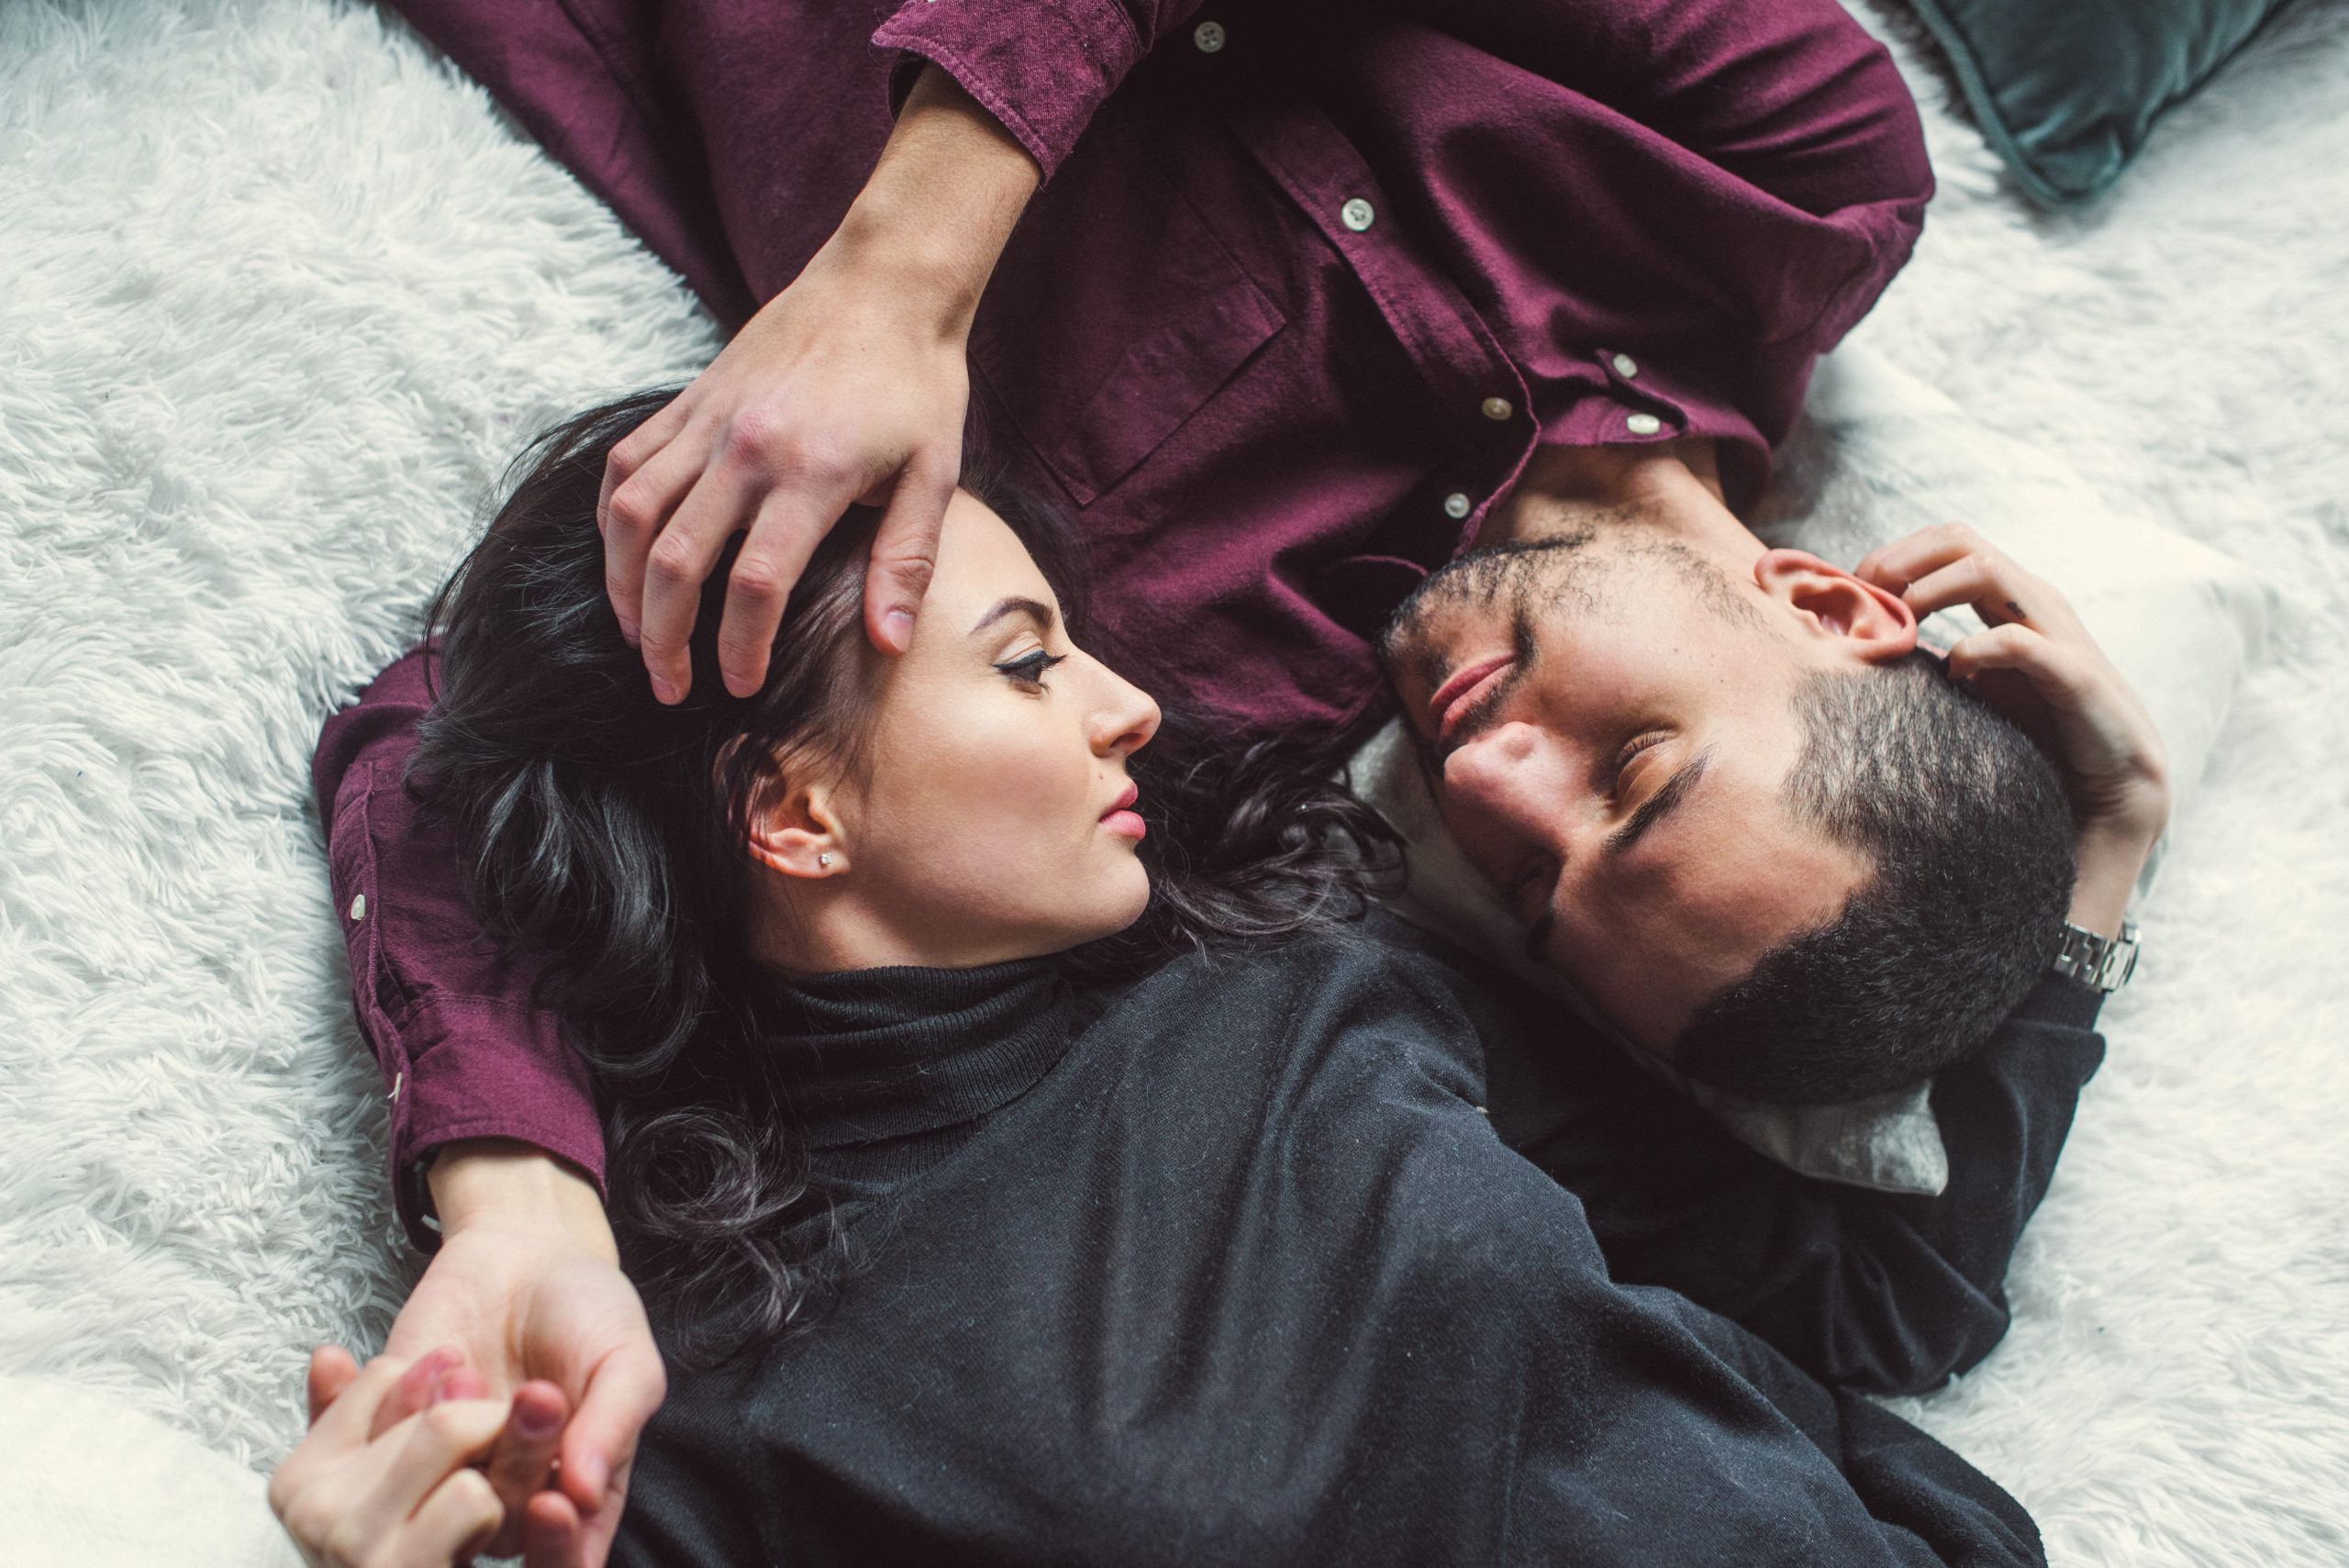 3 signs you will experience deep intimacy with someone